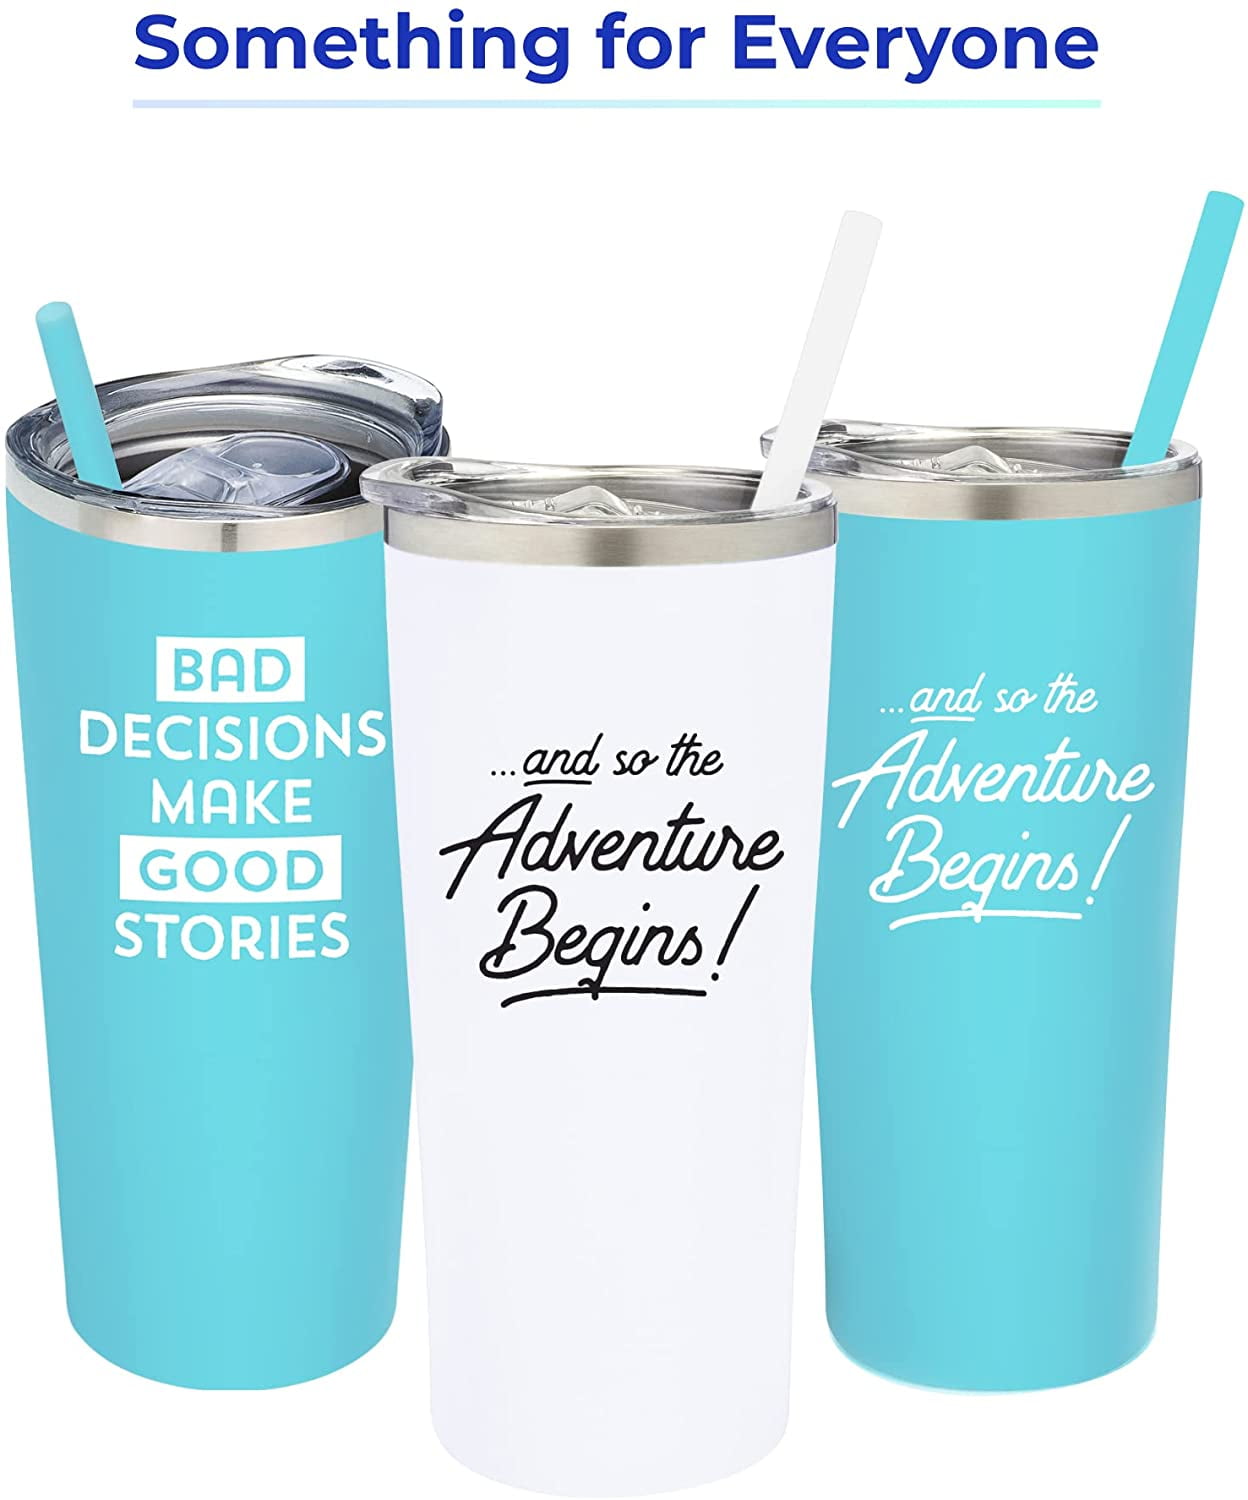 SassyCups Funny Wise Woman Tumbler | Vacuum Insulated Stainless Steel  Coffee Travel Mug with Straw For Women | Drink Tumbler | Birthday Divorce